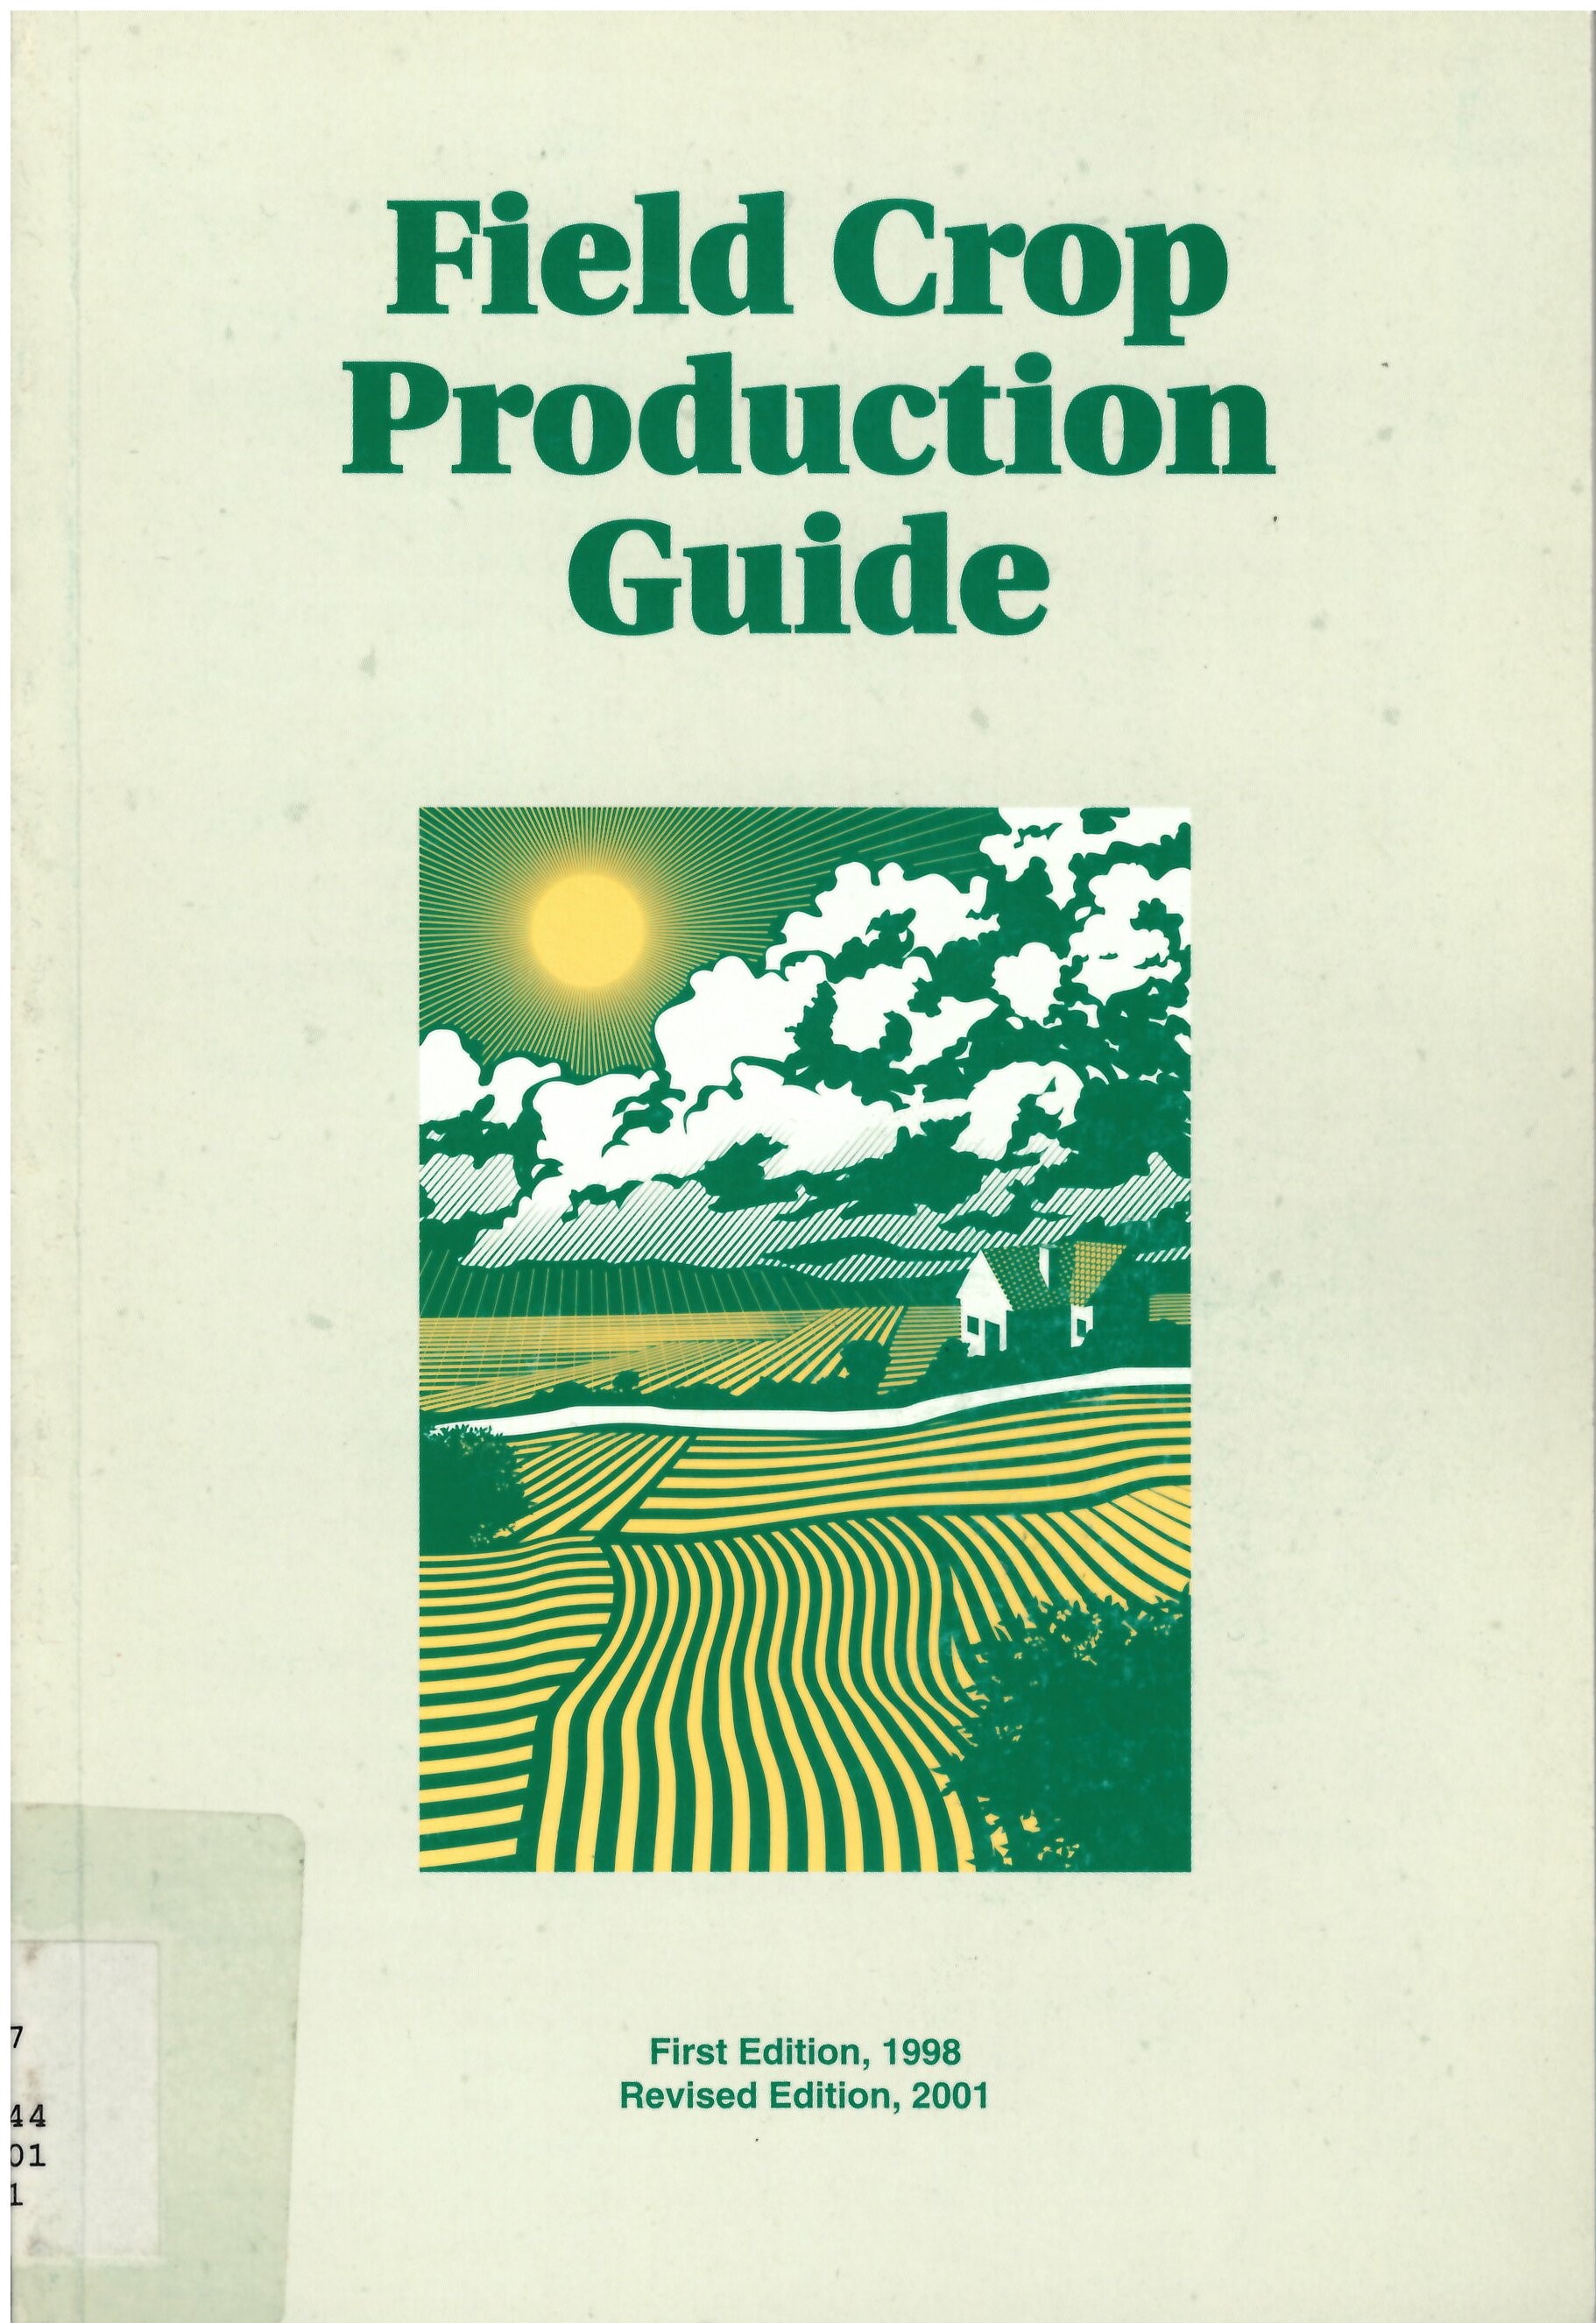 Field crop production guide